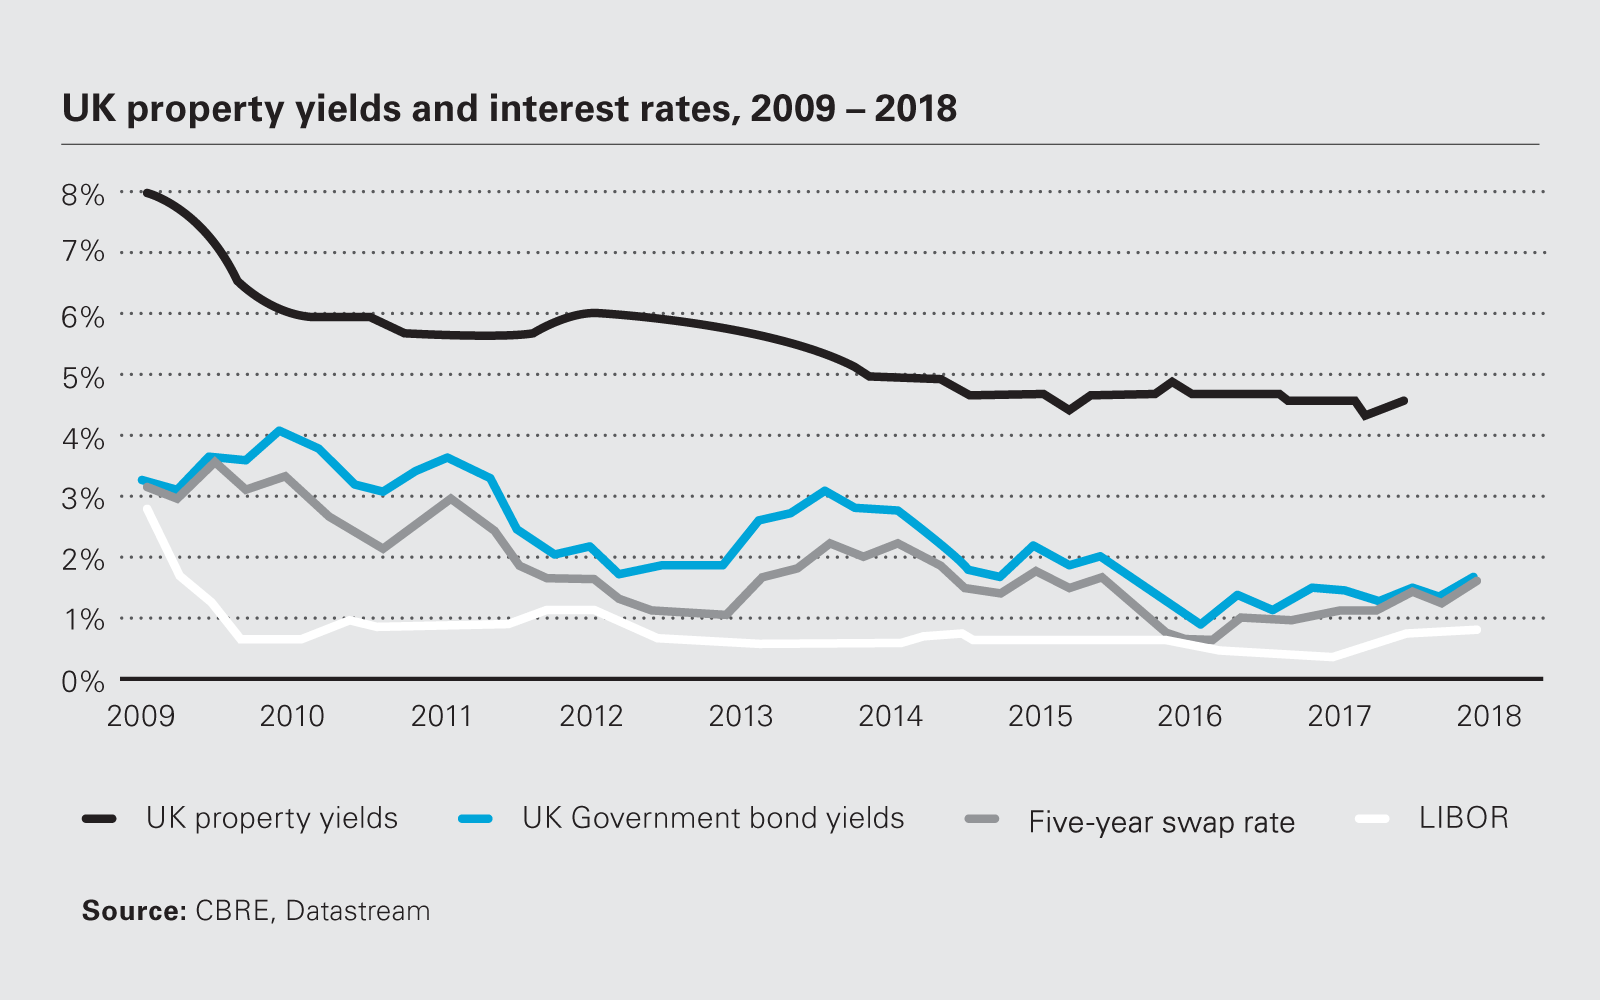 UK property yields and interest rates, 2009-2018